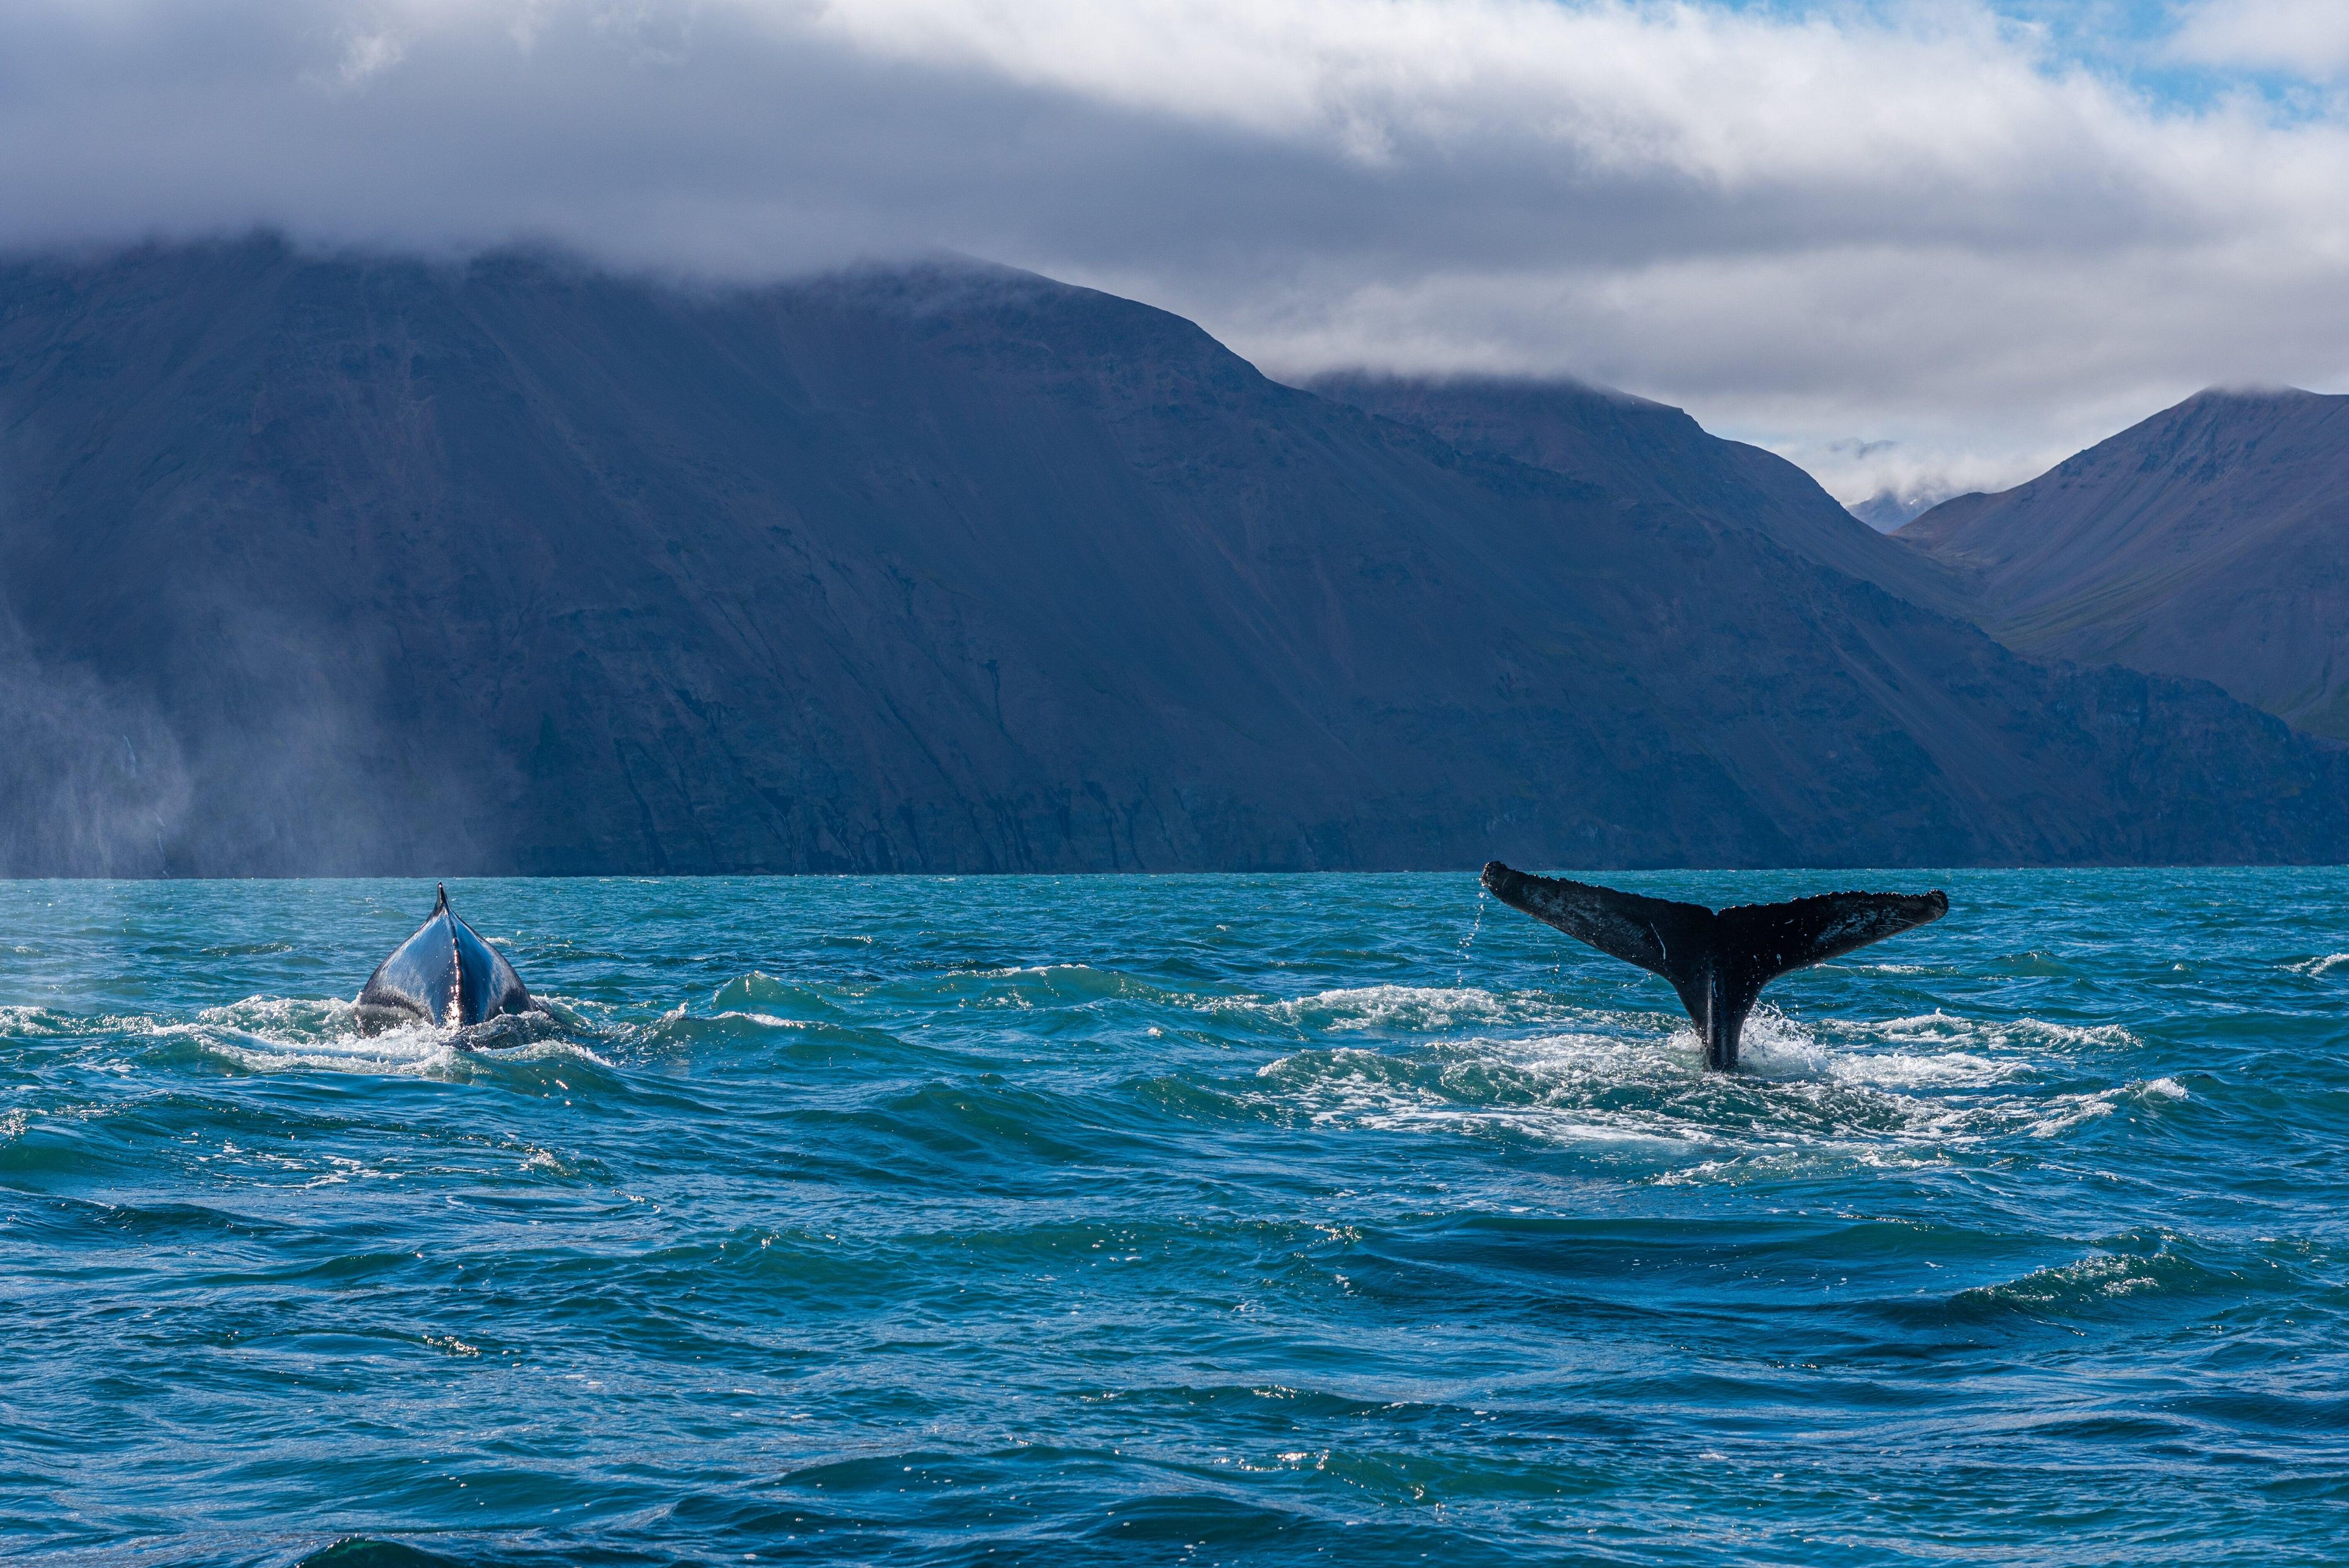 Two humpback whales dive off a mountainous coast.